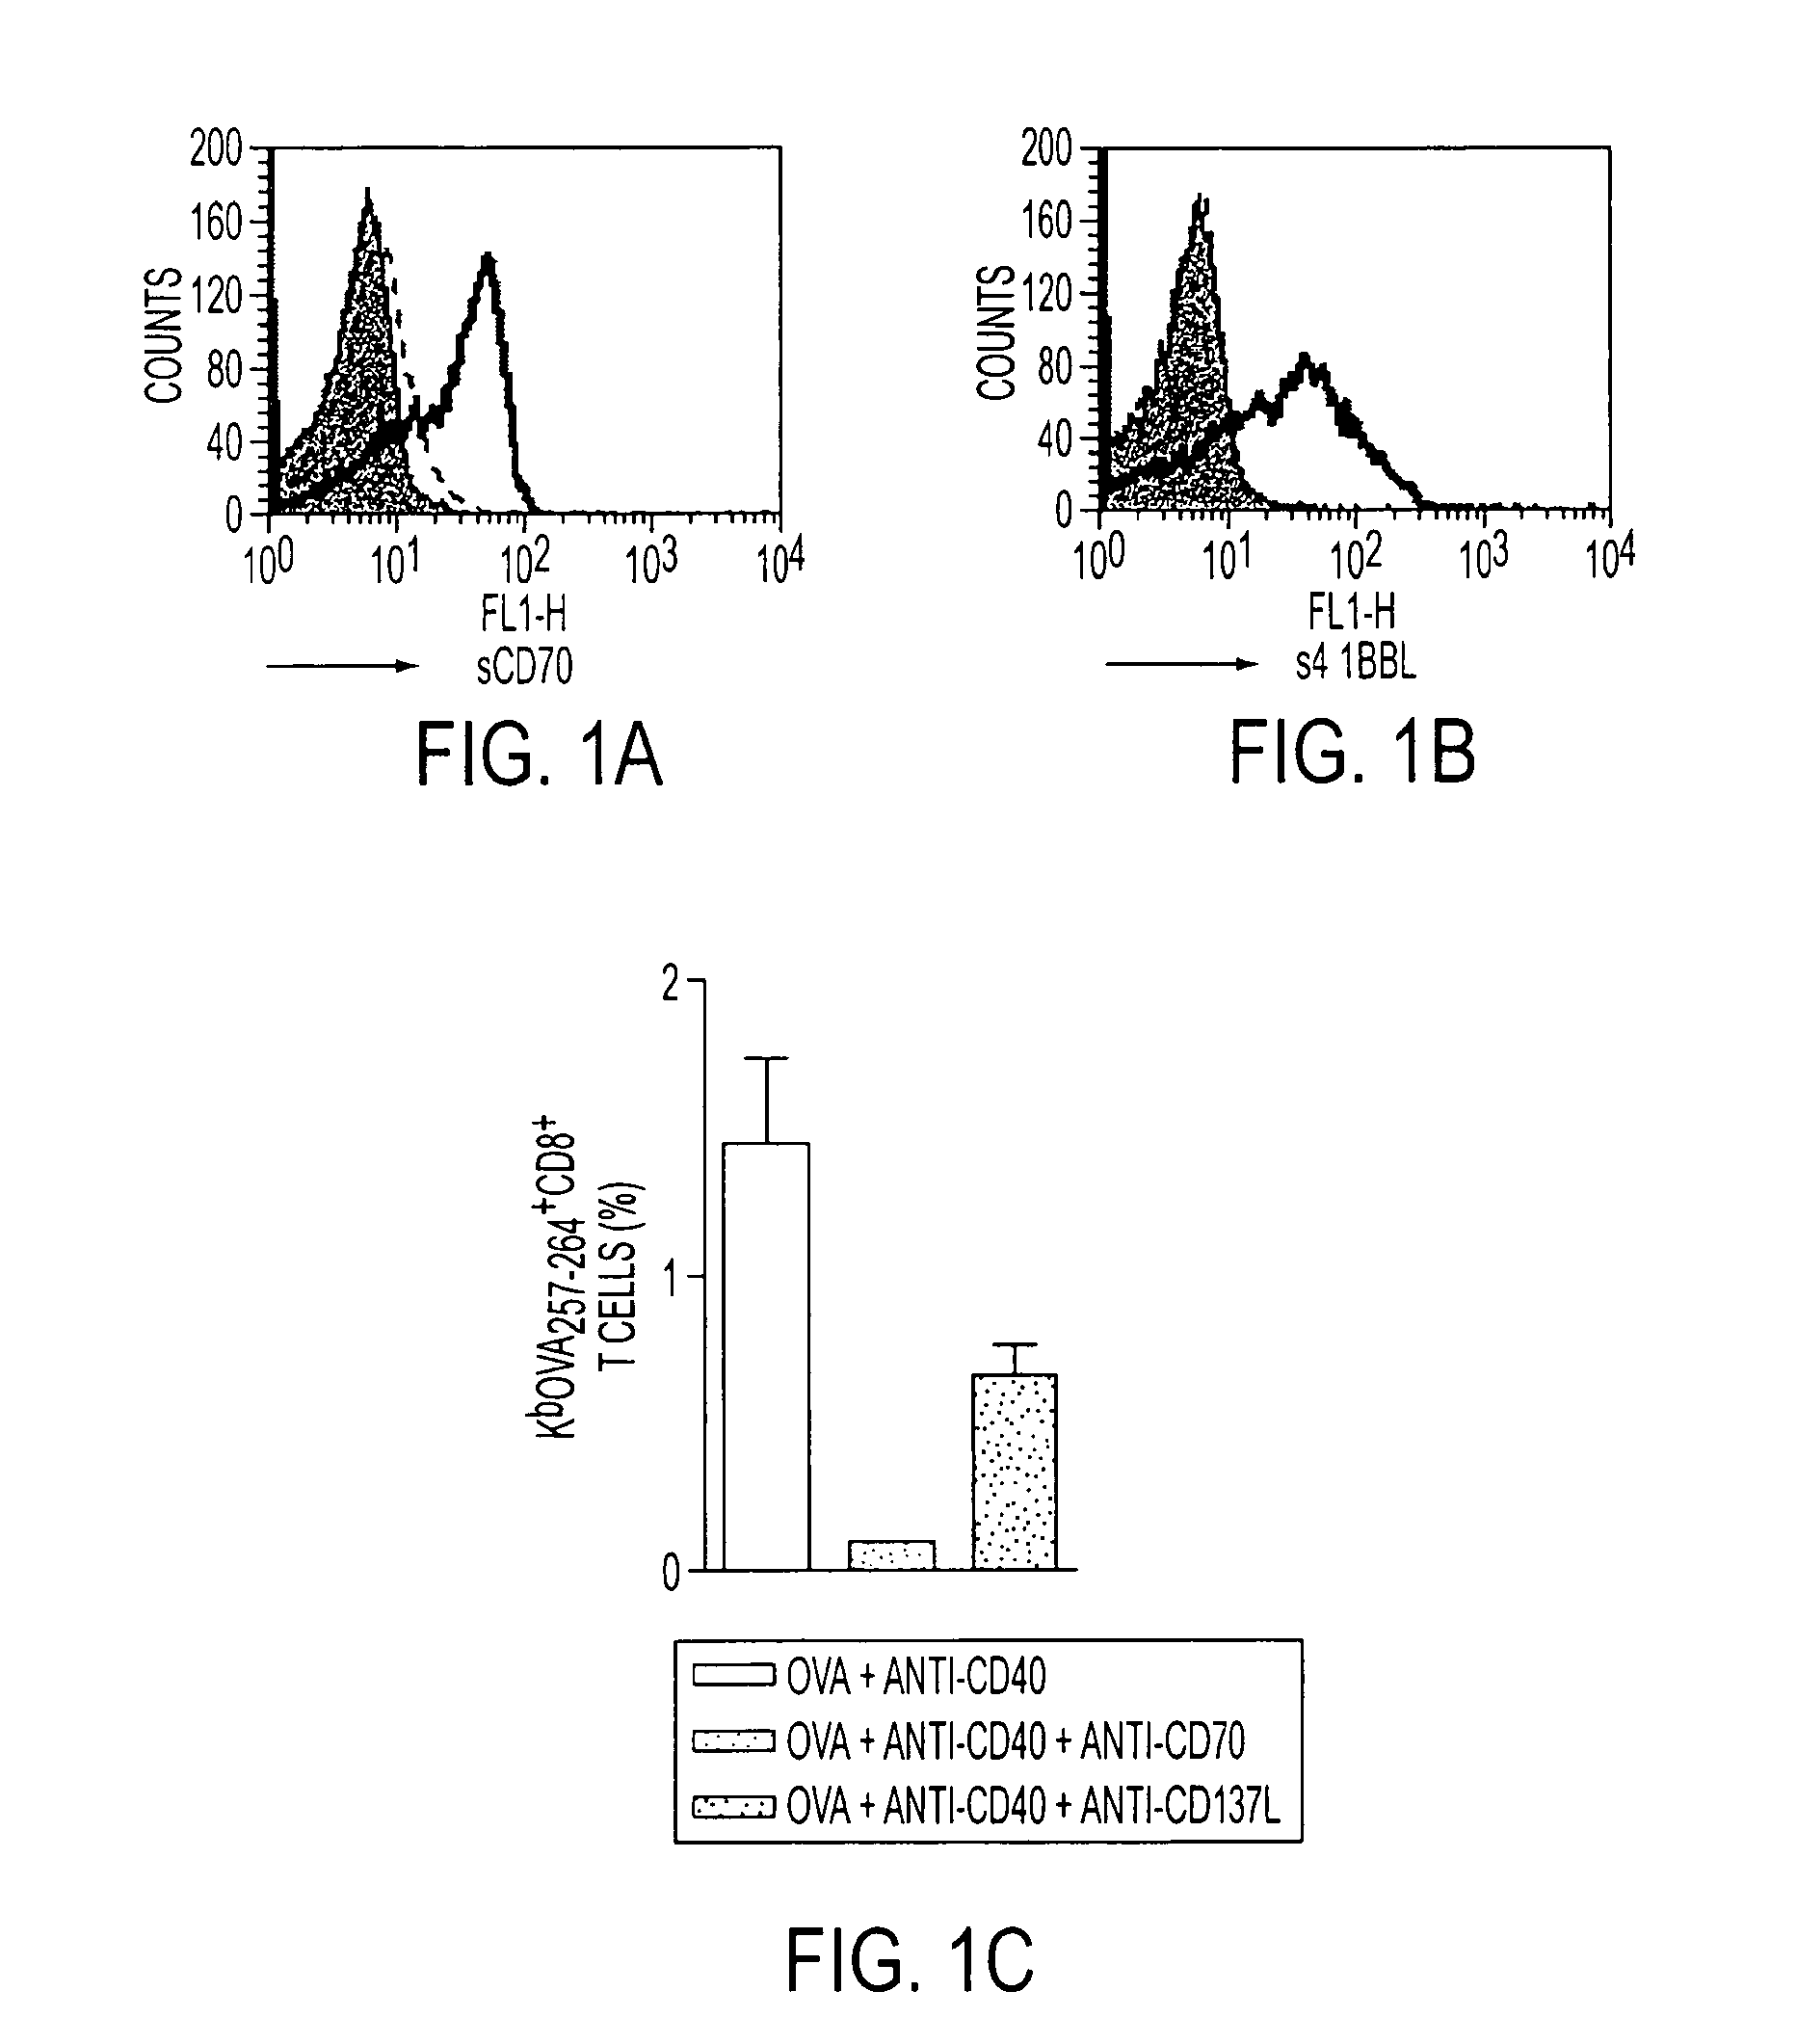 Human immune therapies using a CD27 agonist alone or in combination with other immune modulators